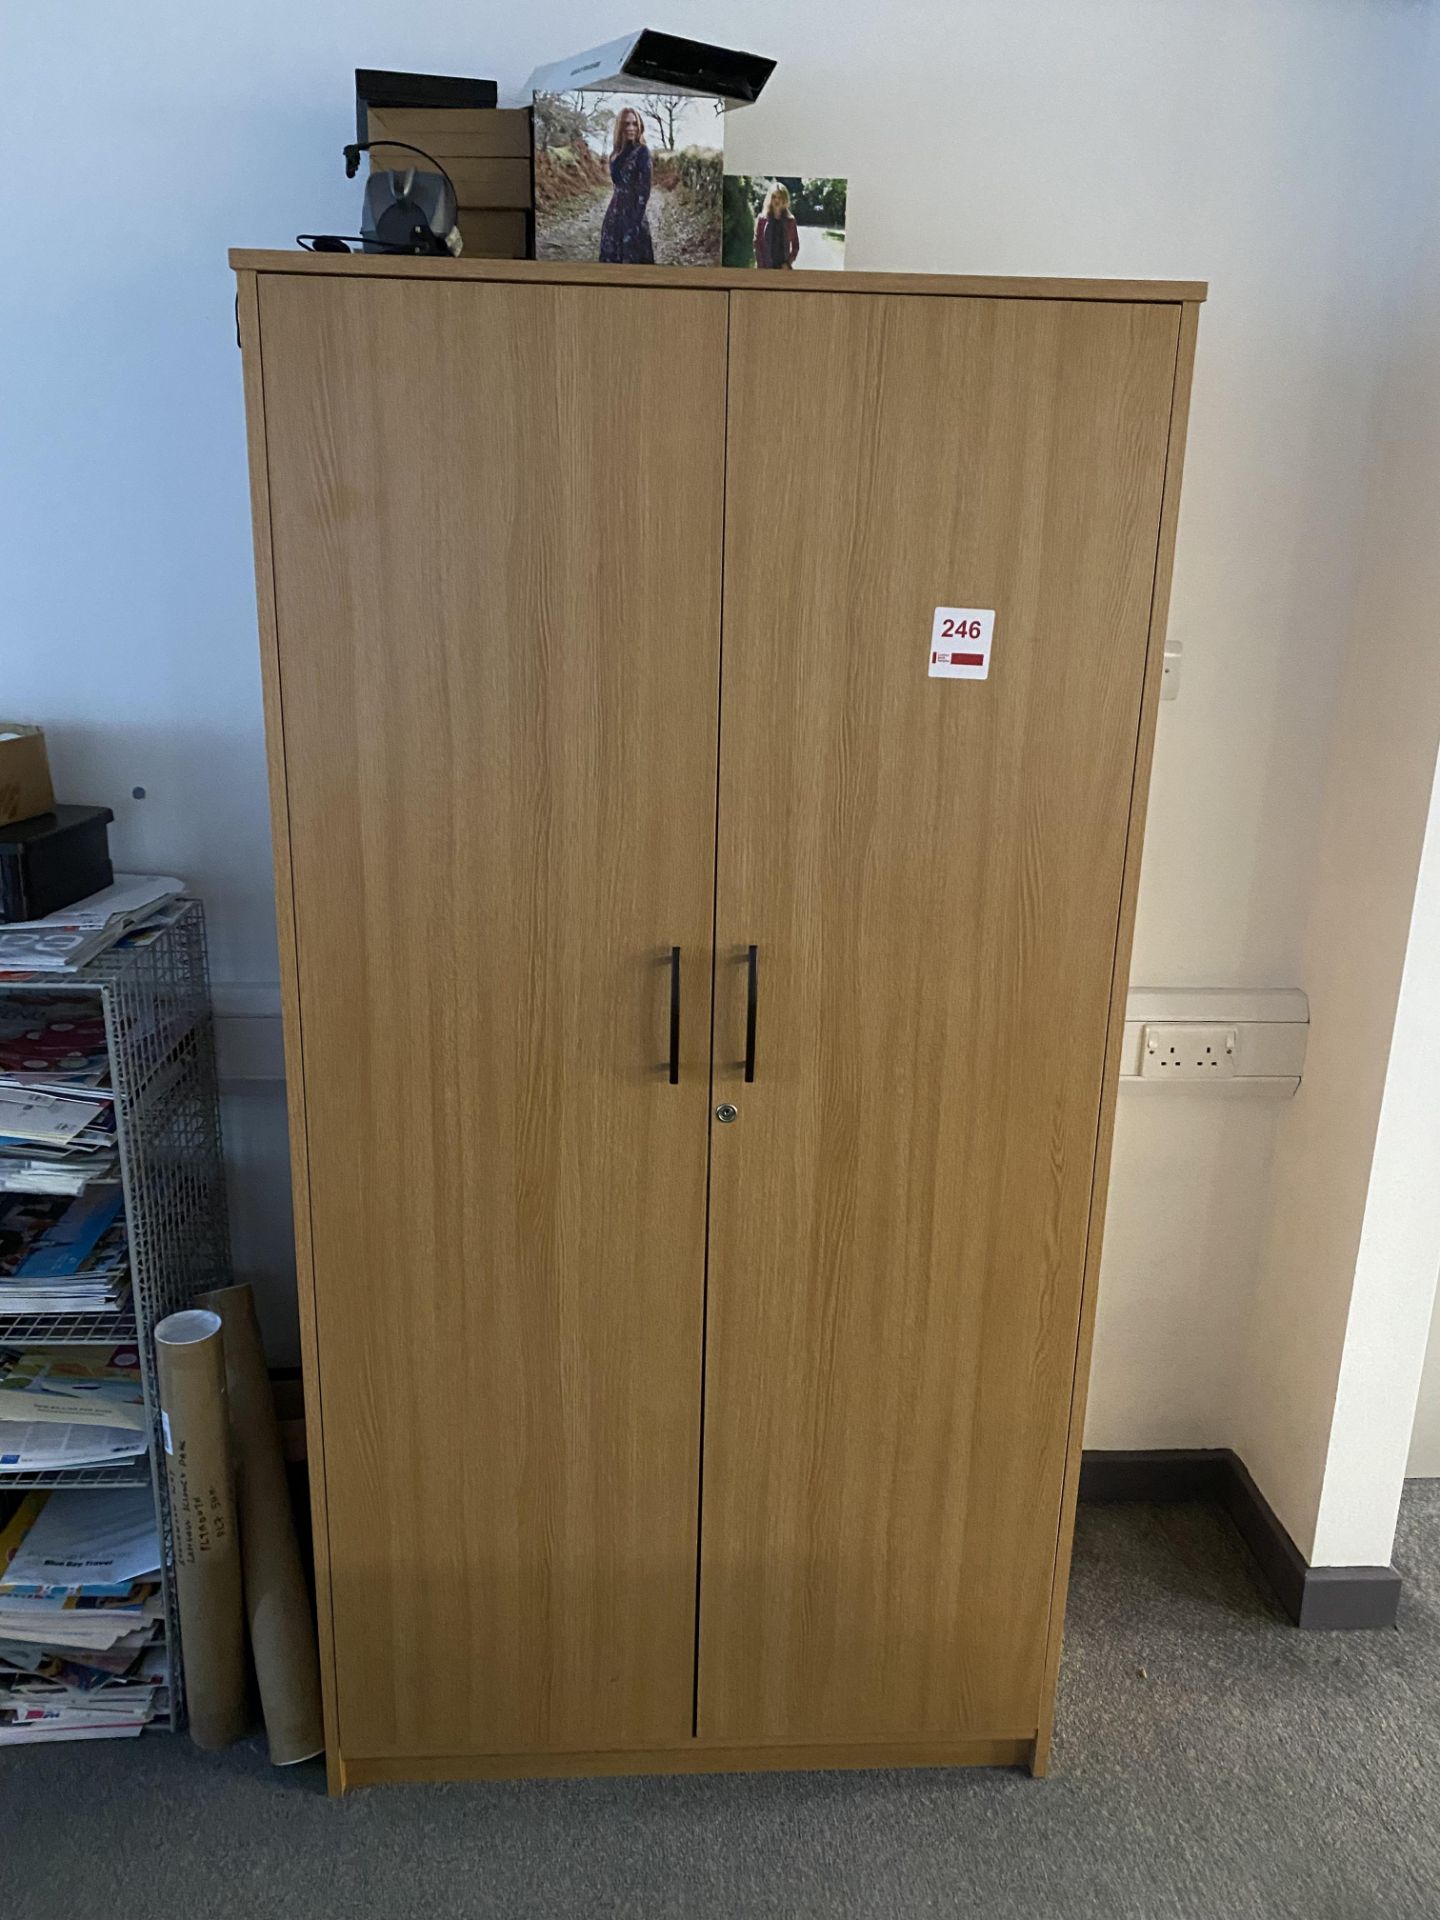 Two wood effect storage cupboards